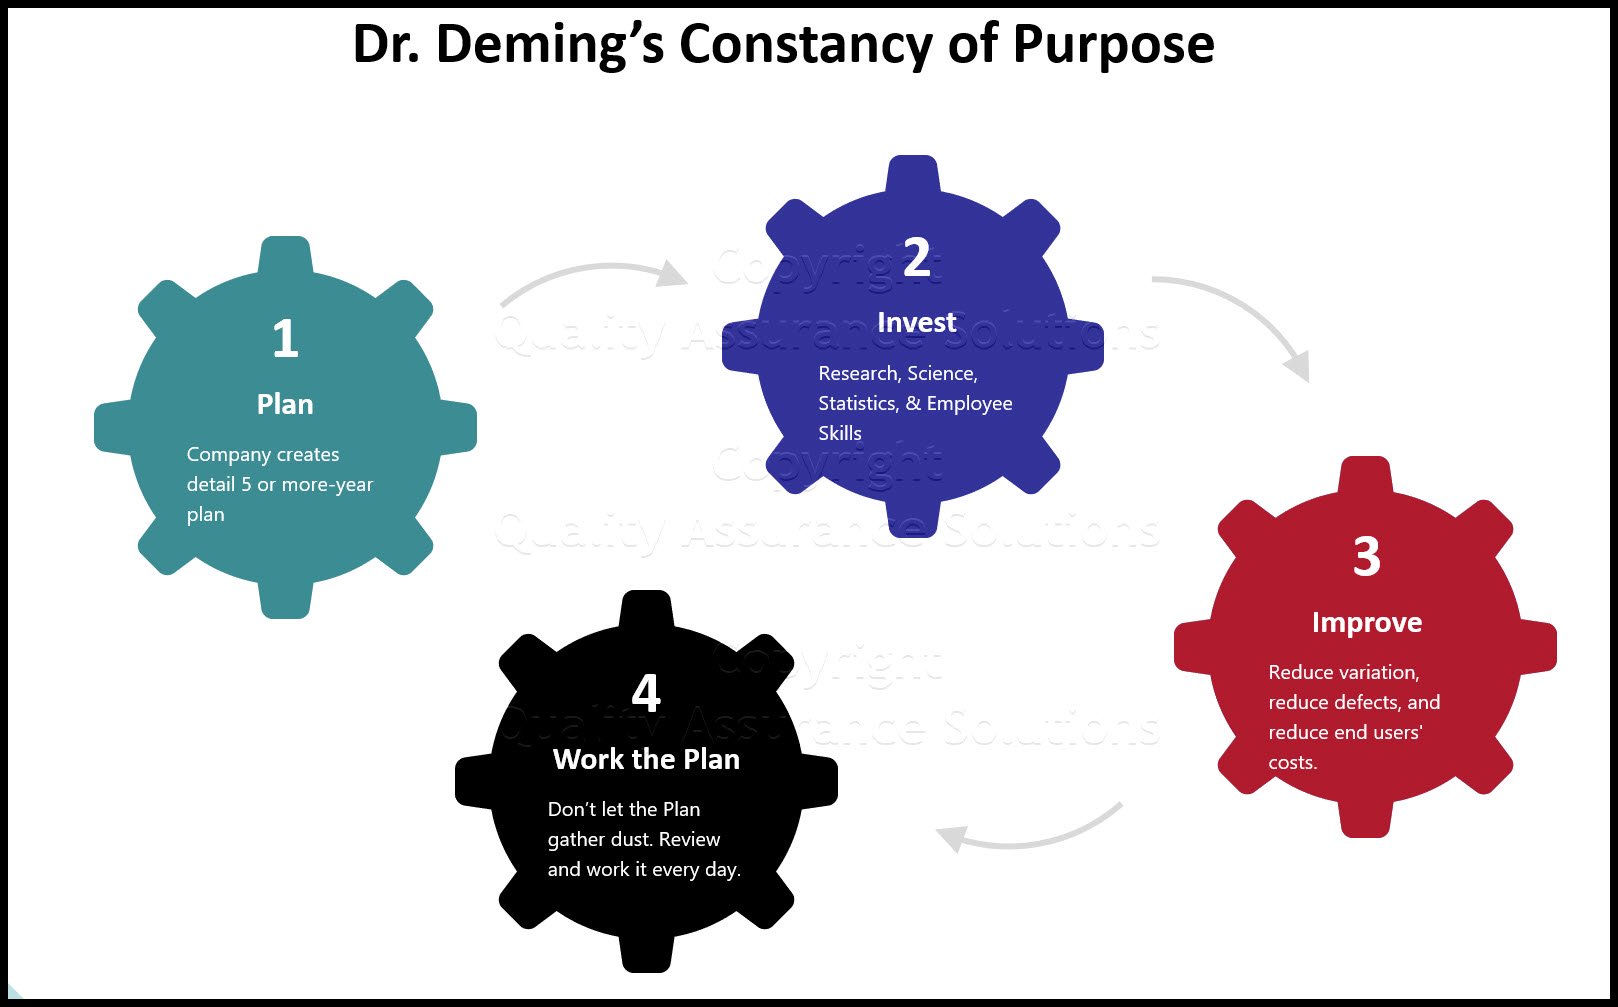 Deming Point 1, Constancy of Purpose. Article discusses the key items that drive constancy of purpose within a company. 